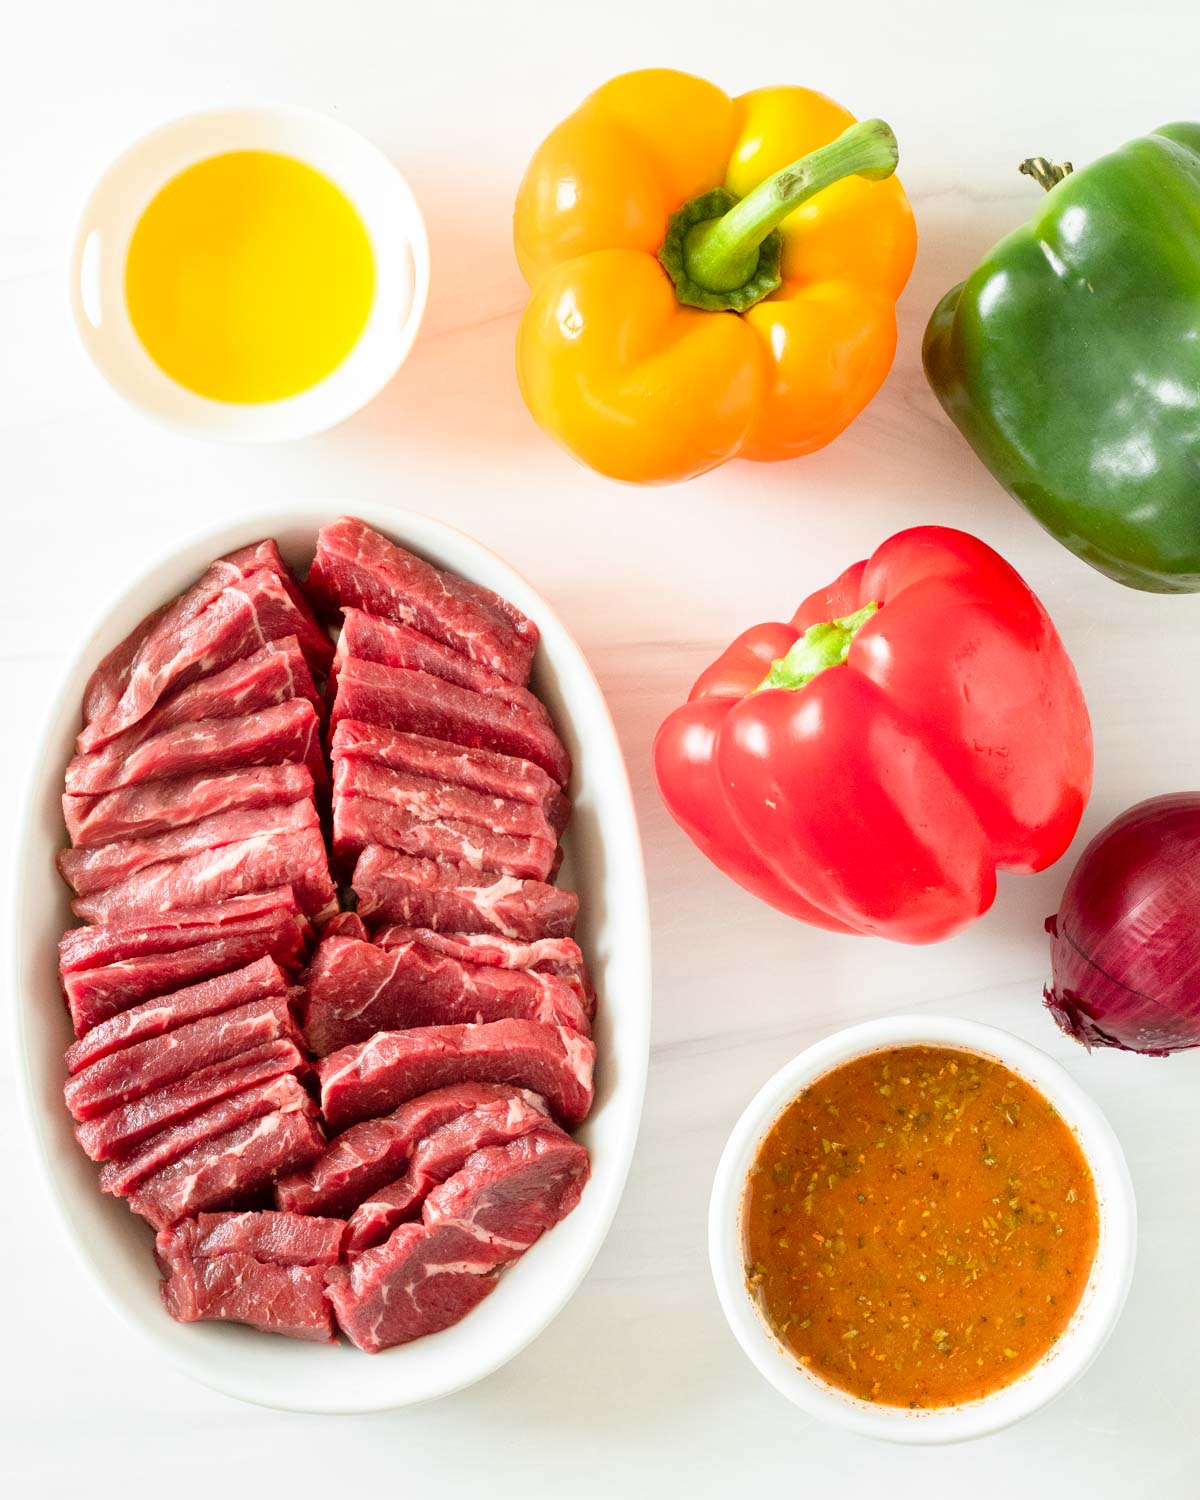 These steak fajitas are an easy one-pan recipe made with steak and vegetables cooked in a homemade fajita marinade for excellent flavor. This recipe is the perfect weeknight dinner and a kid-friendly meal.